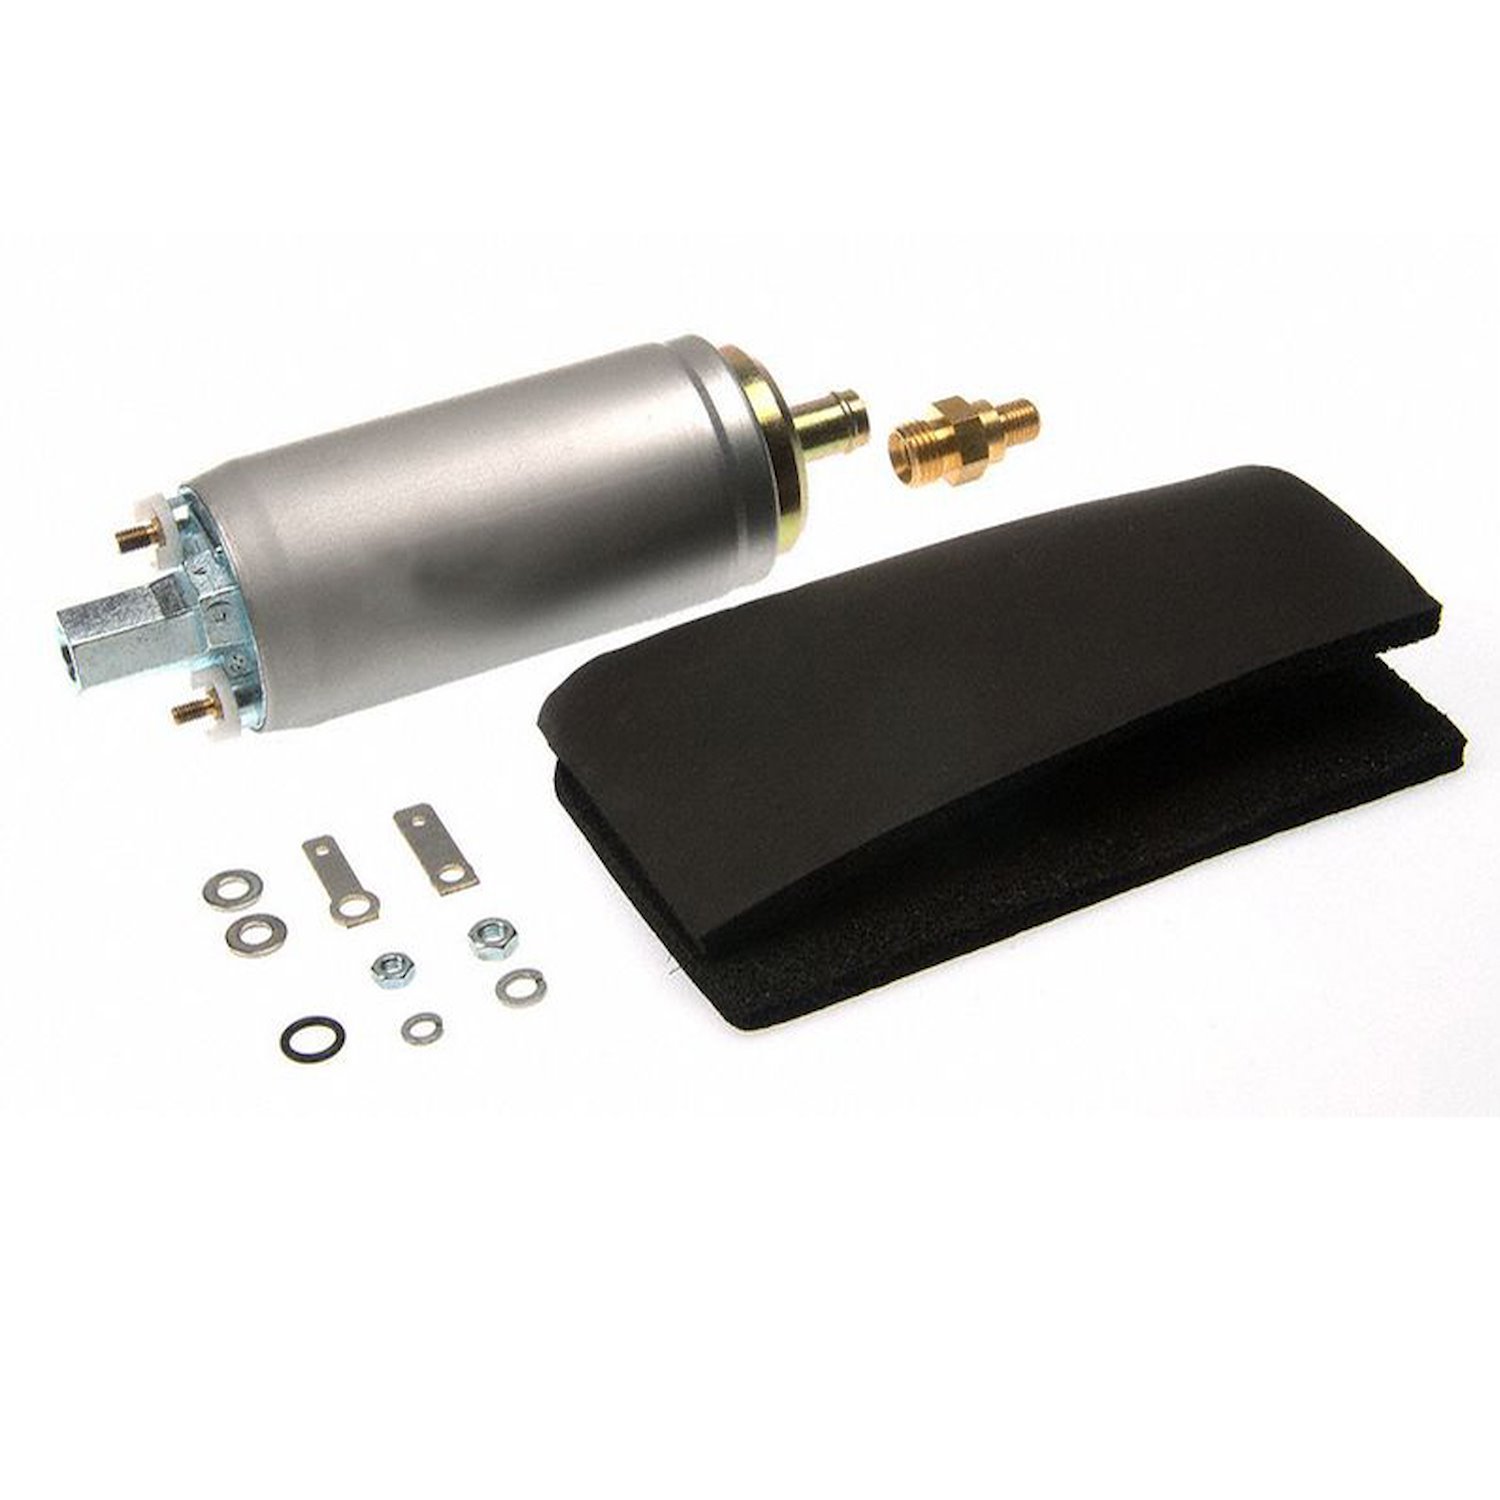 Replacement In-Line Electric Fuel Pump for 1977-1992 Porsche